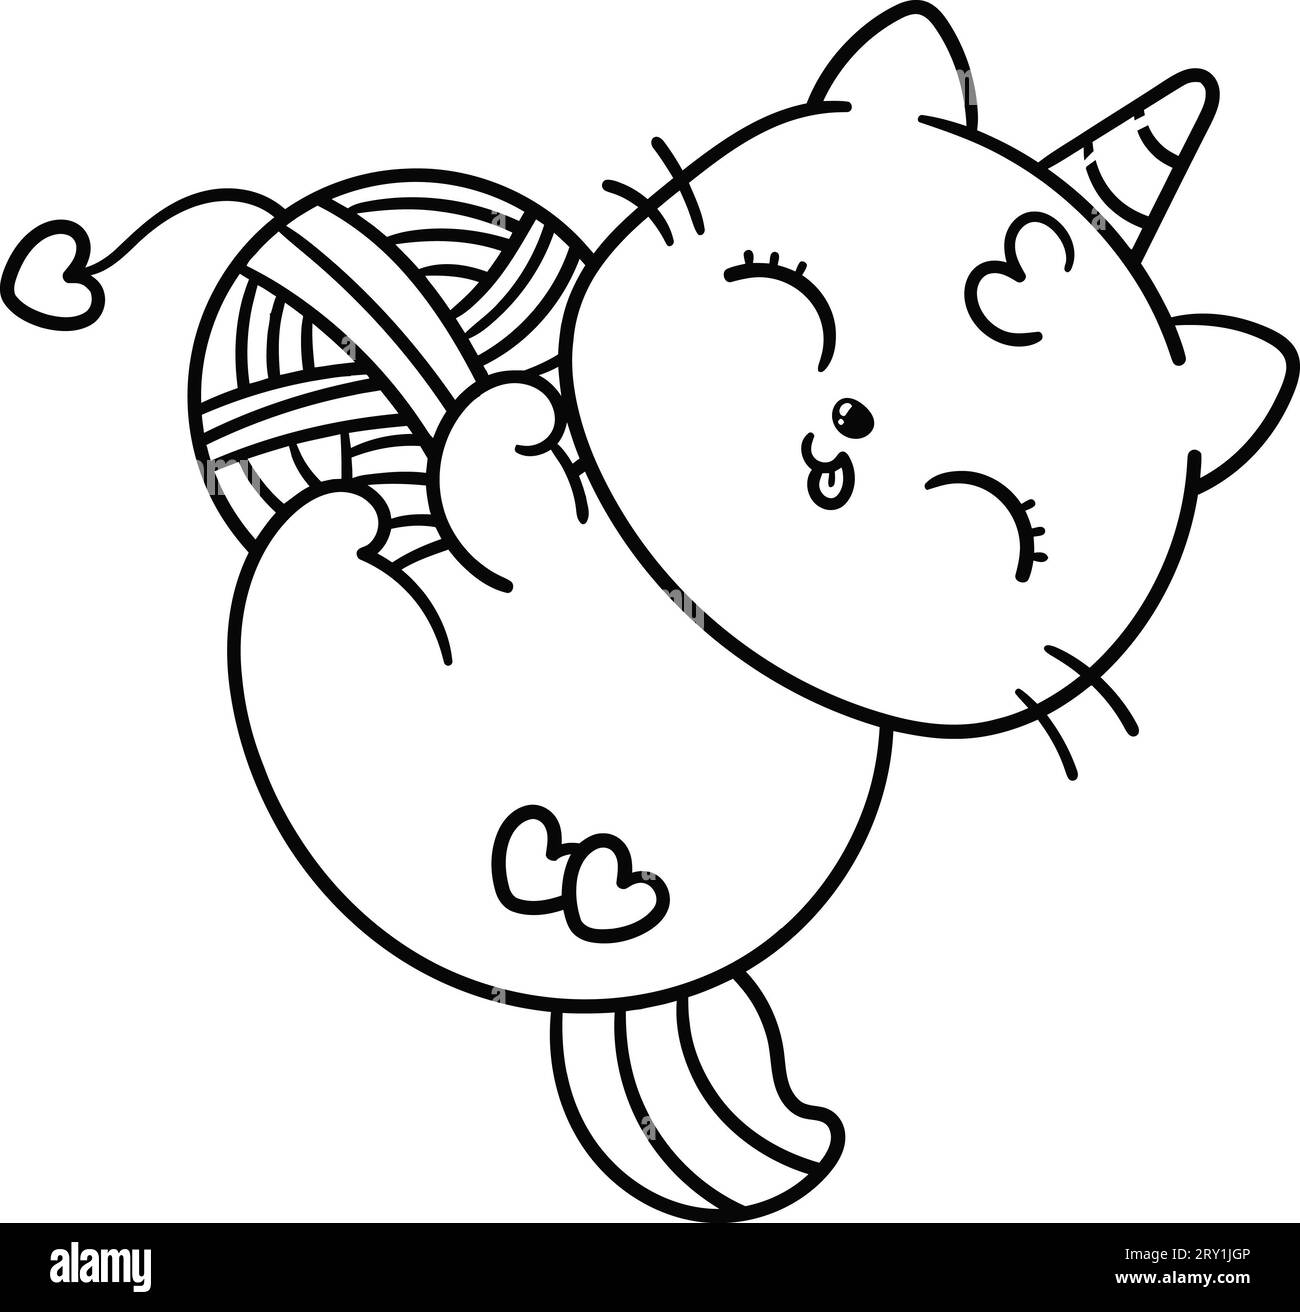 Cute Unicorn Cartoon Cat coloring page for kids Stock Photo